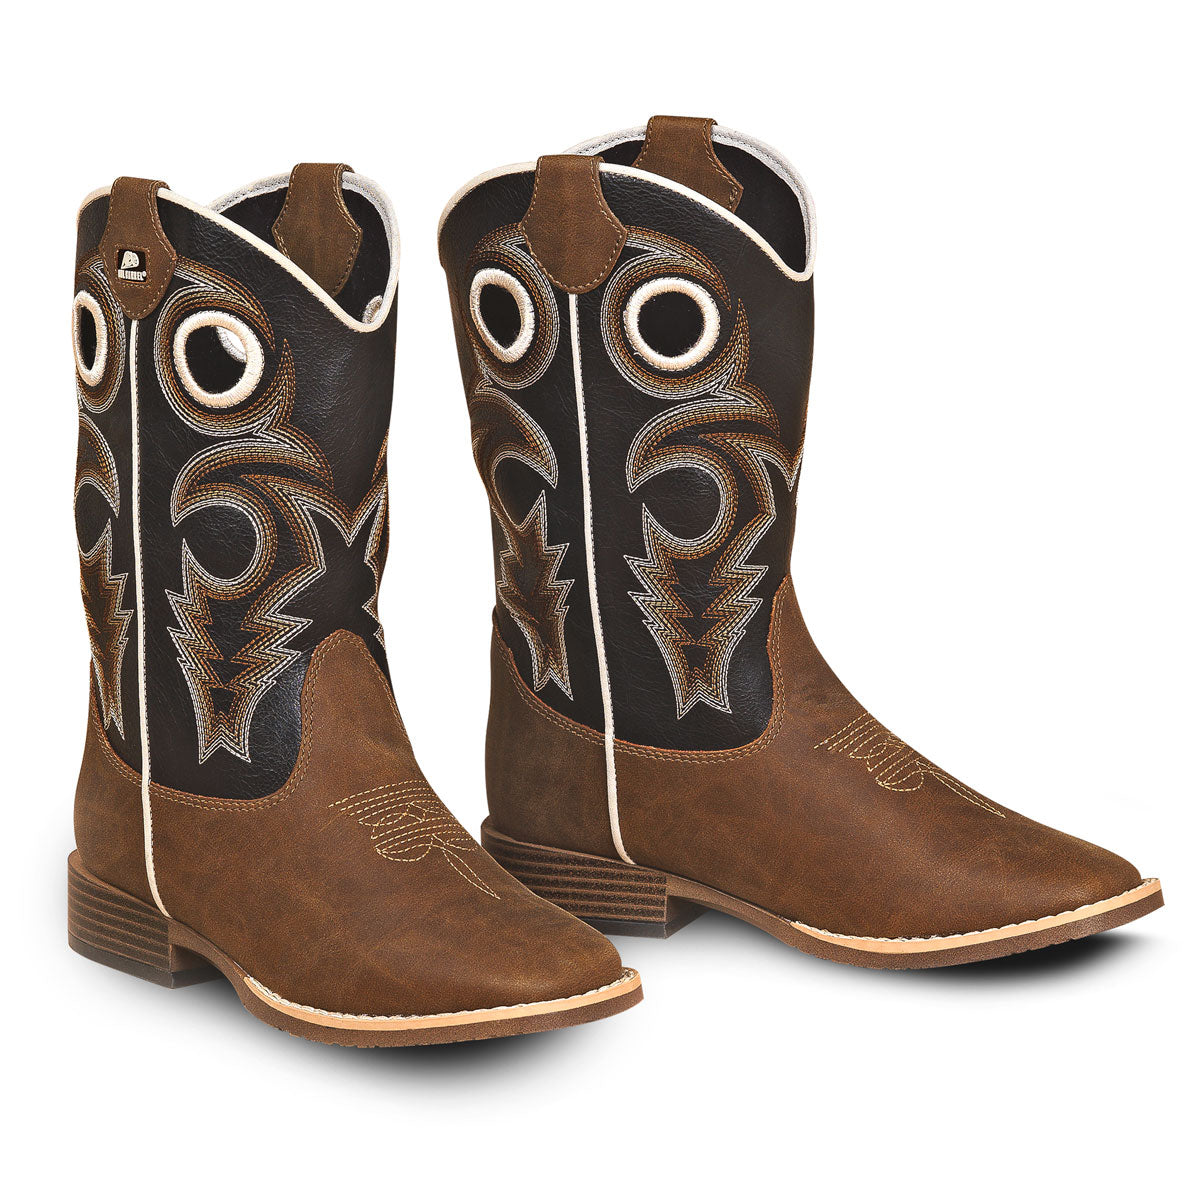 Double Barrel Trace Boy's Western Boots - Brown/Black